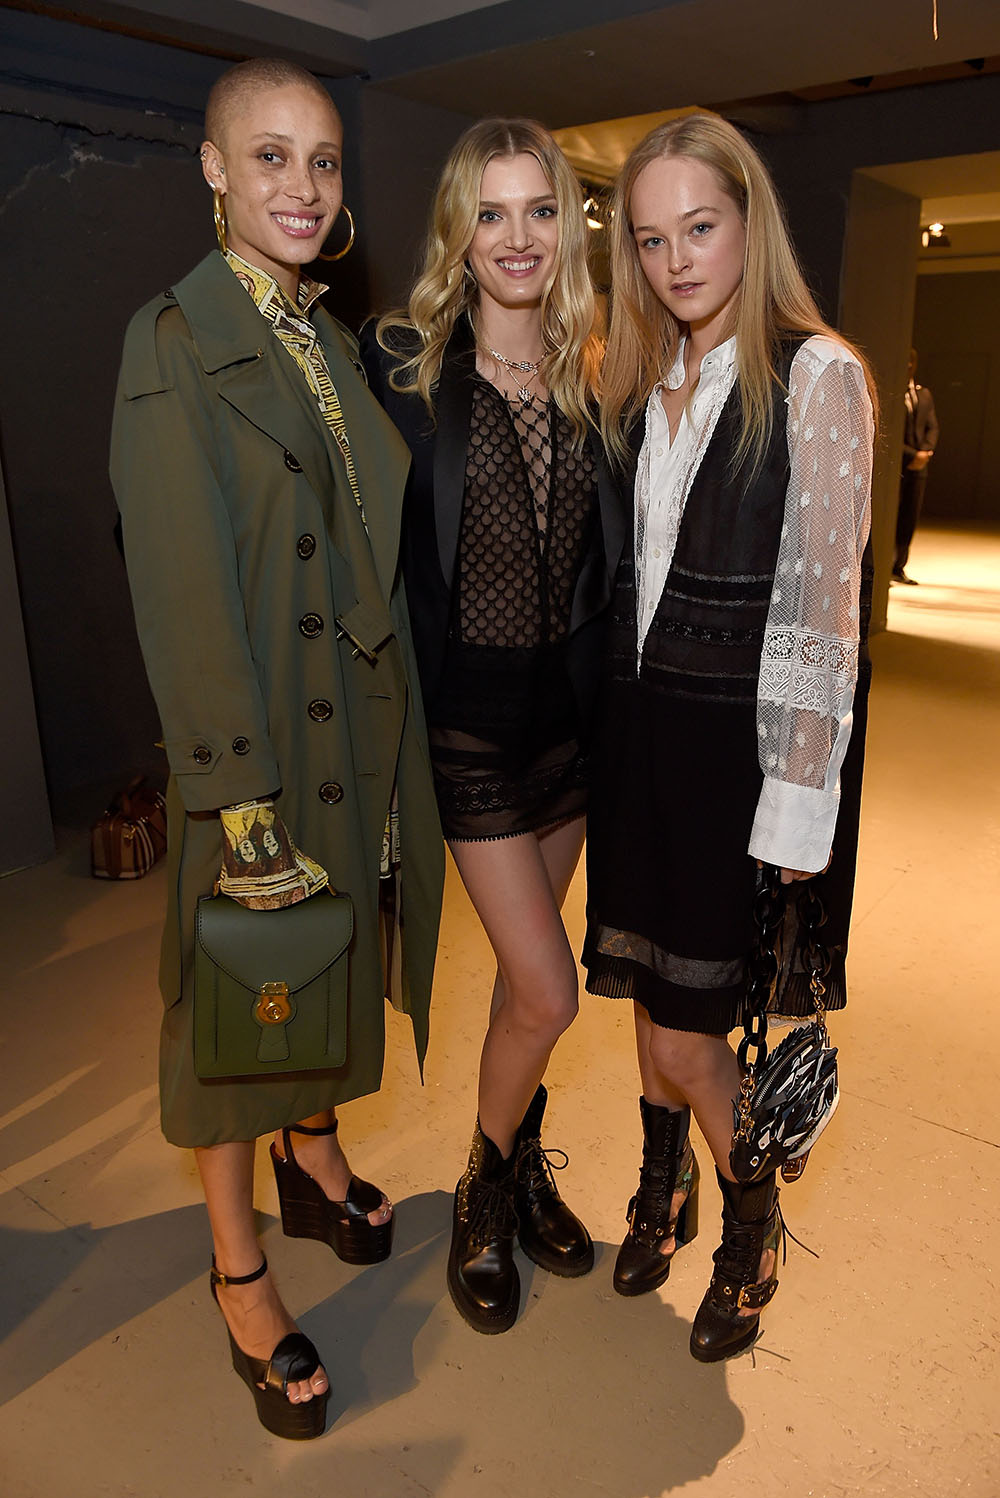 LONDON, ENGLAND - FEBRUARY 20: (L-R) Adwoa Aboah, Lily Donaldson and Jean Campbell wearing Burberry attend the Burberry February 2017 Show during London Fashion Week February 2017 at Makers House on February 20, 2017 in London, England. (Photo by David M. Benett/Dave Benett/Getty Images for Burberry)